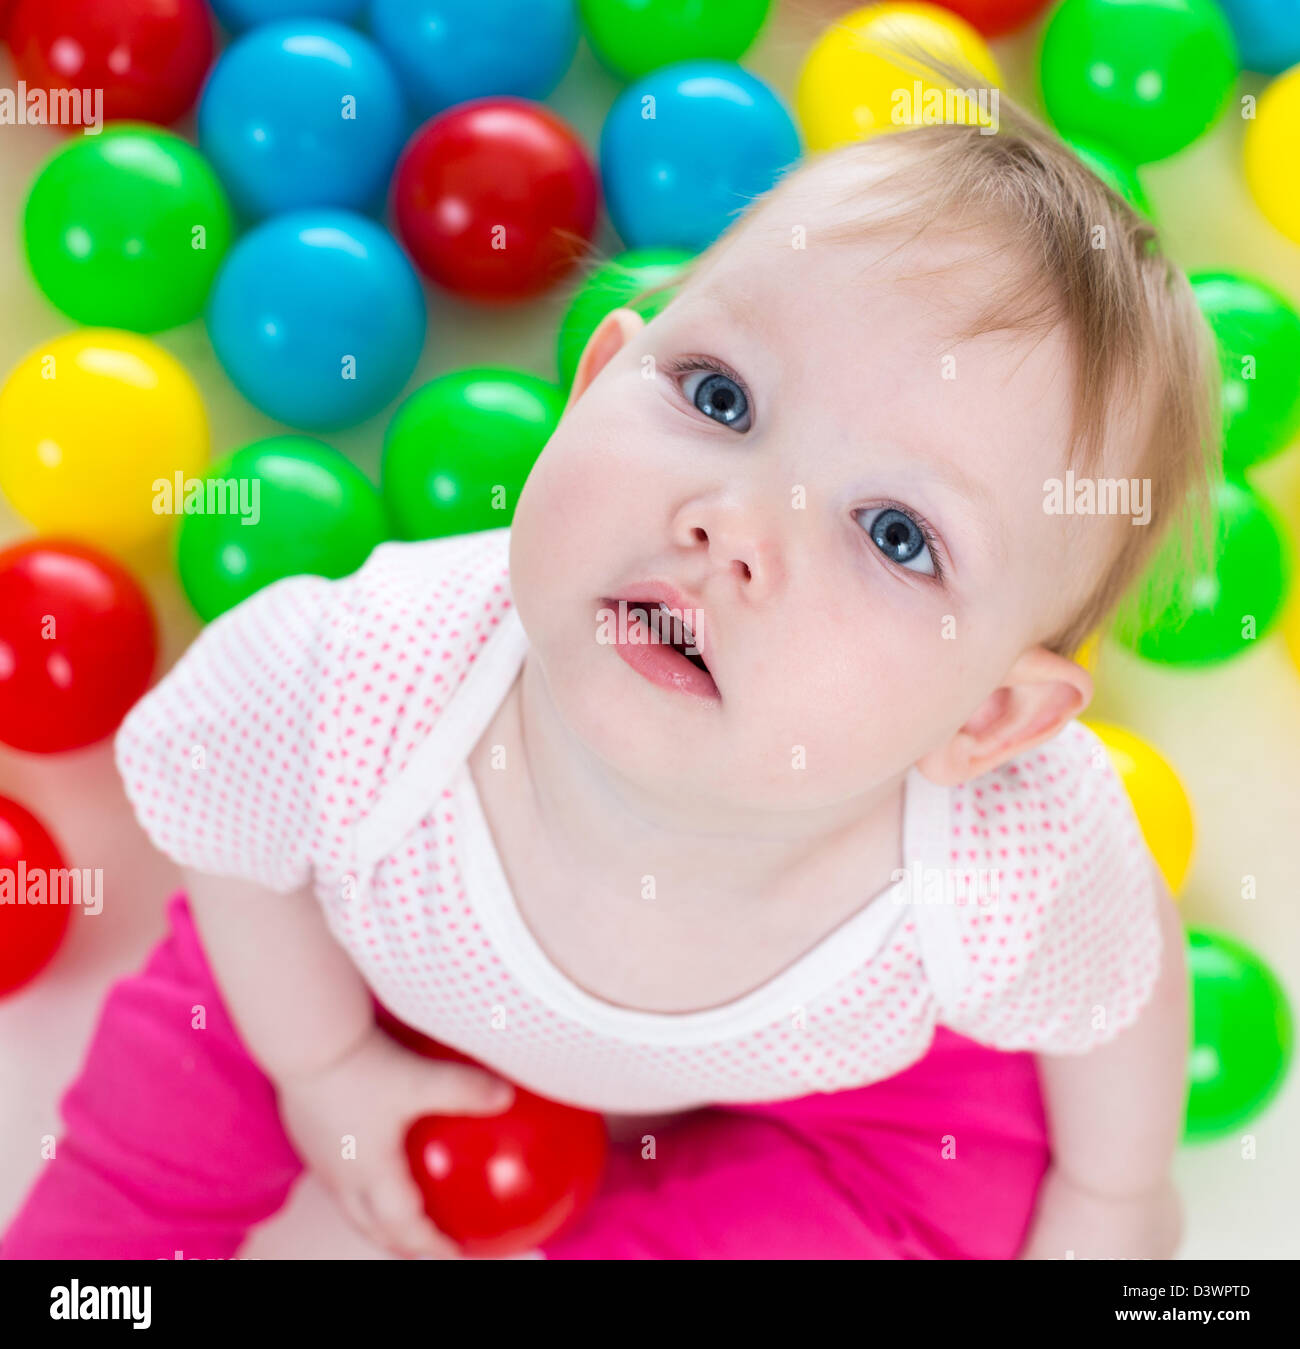 Portrait of cute baby girl playing among colorful balls Stock Photo